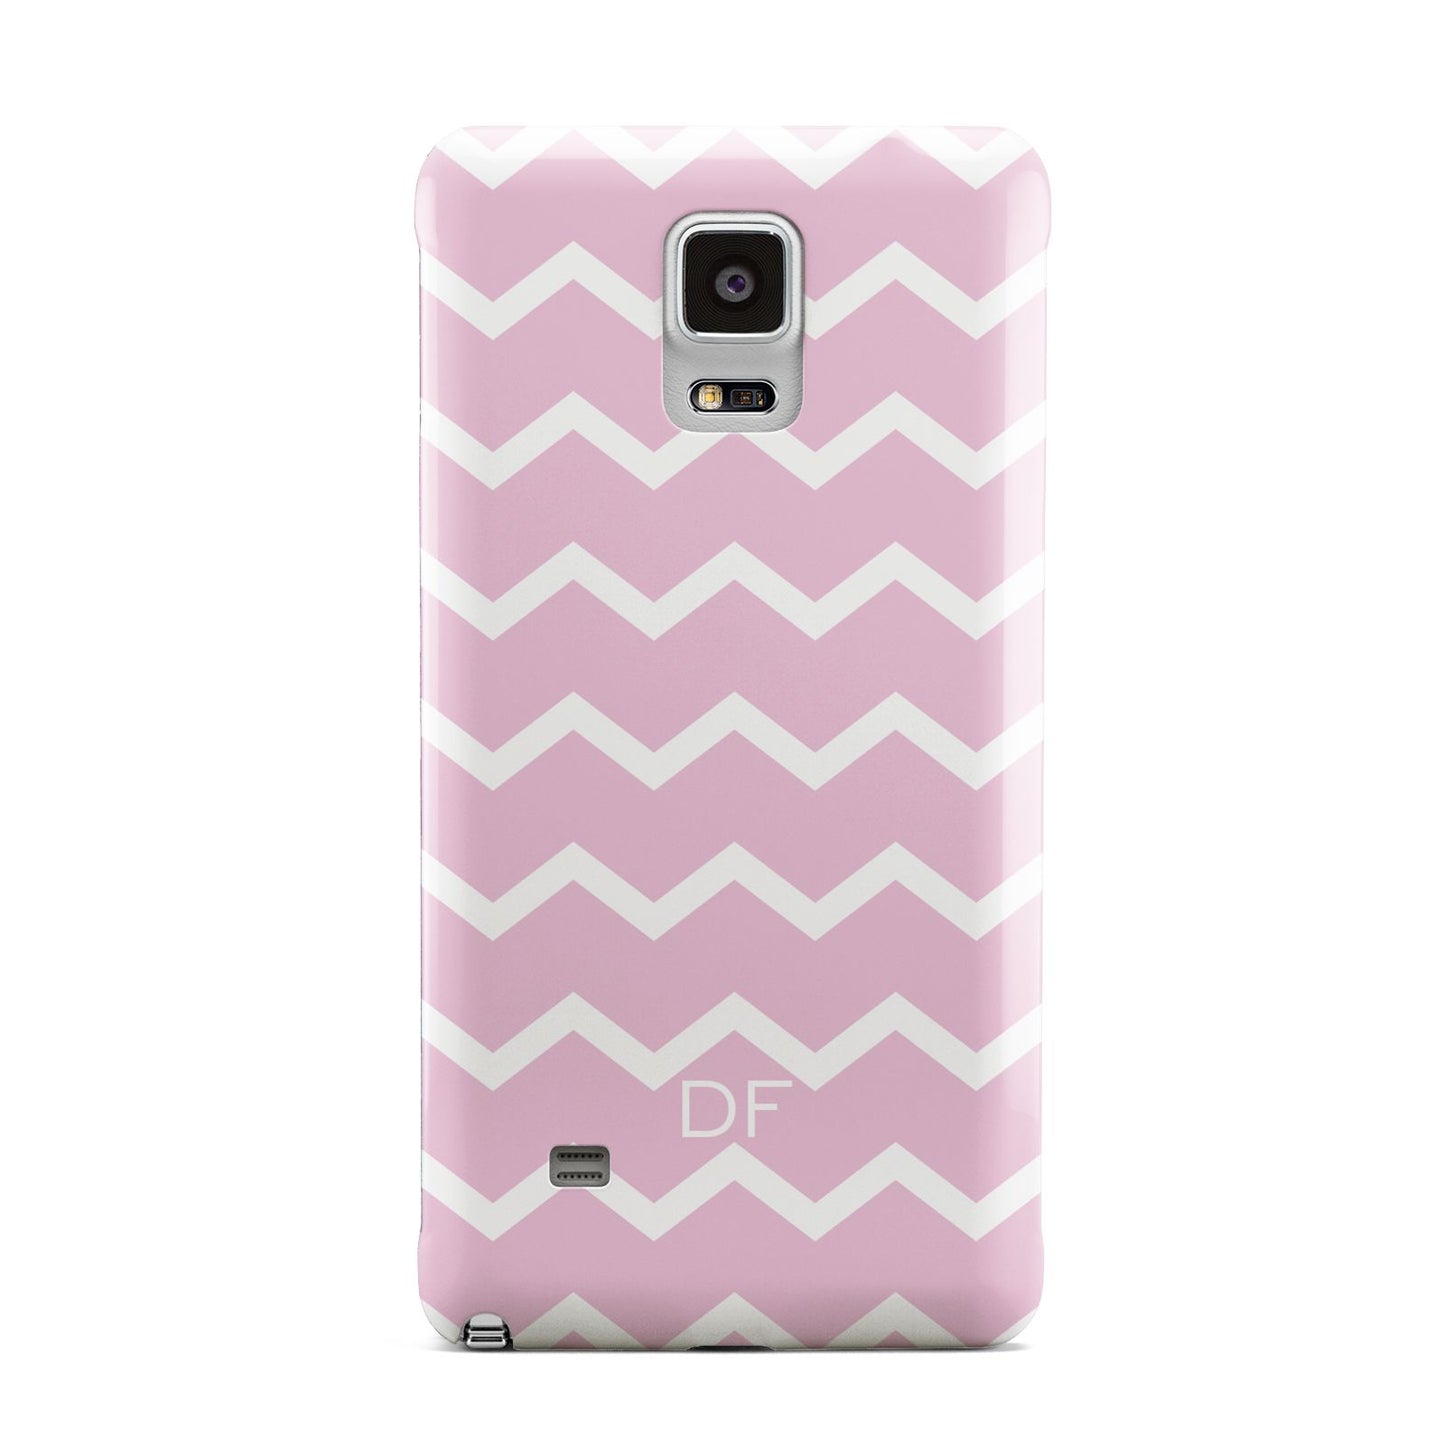 Personalised Chevron Pink Samsung Galaxy Note 4 Case